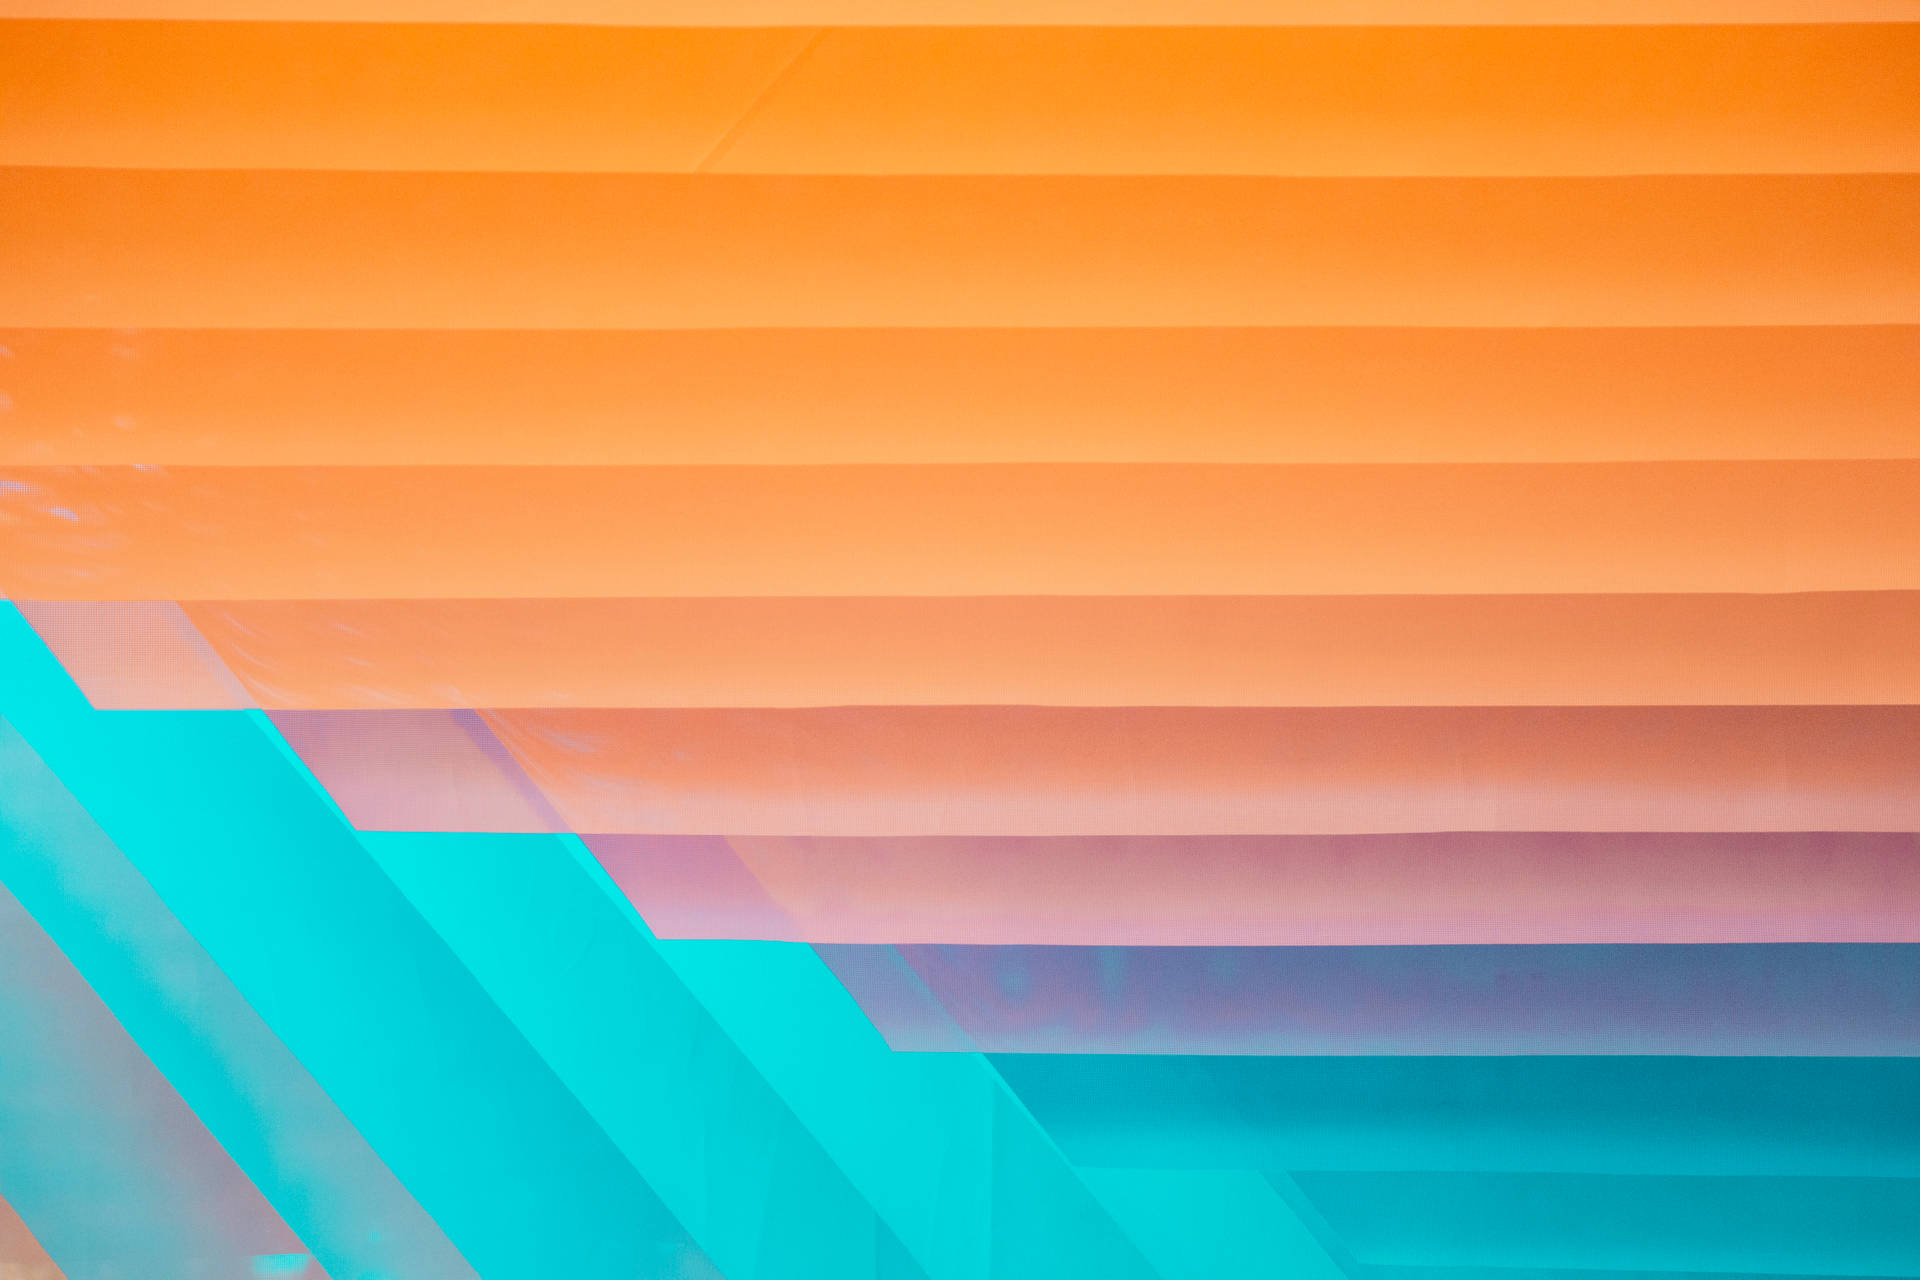 4k Abstract Intersecting Lines Wallpaper